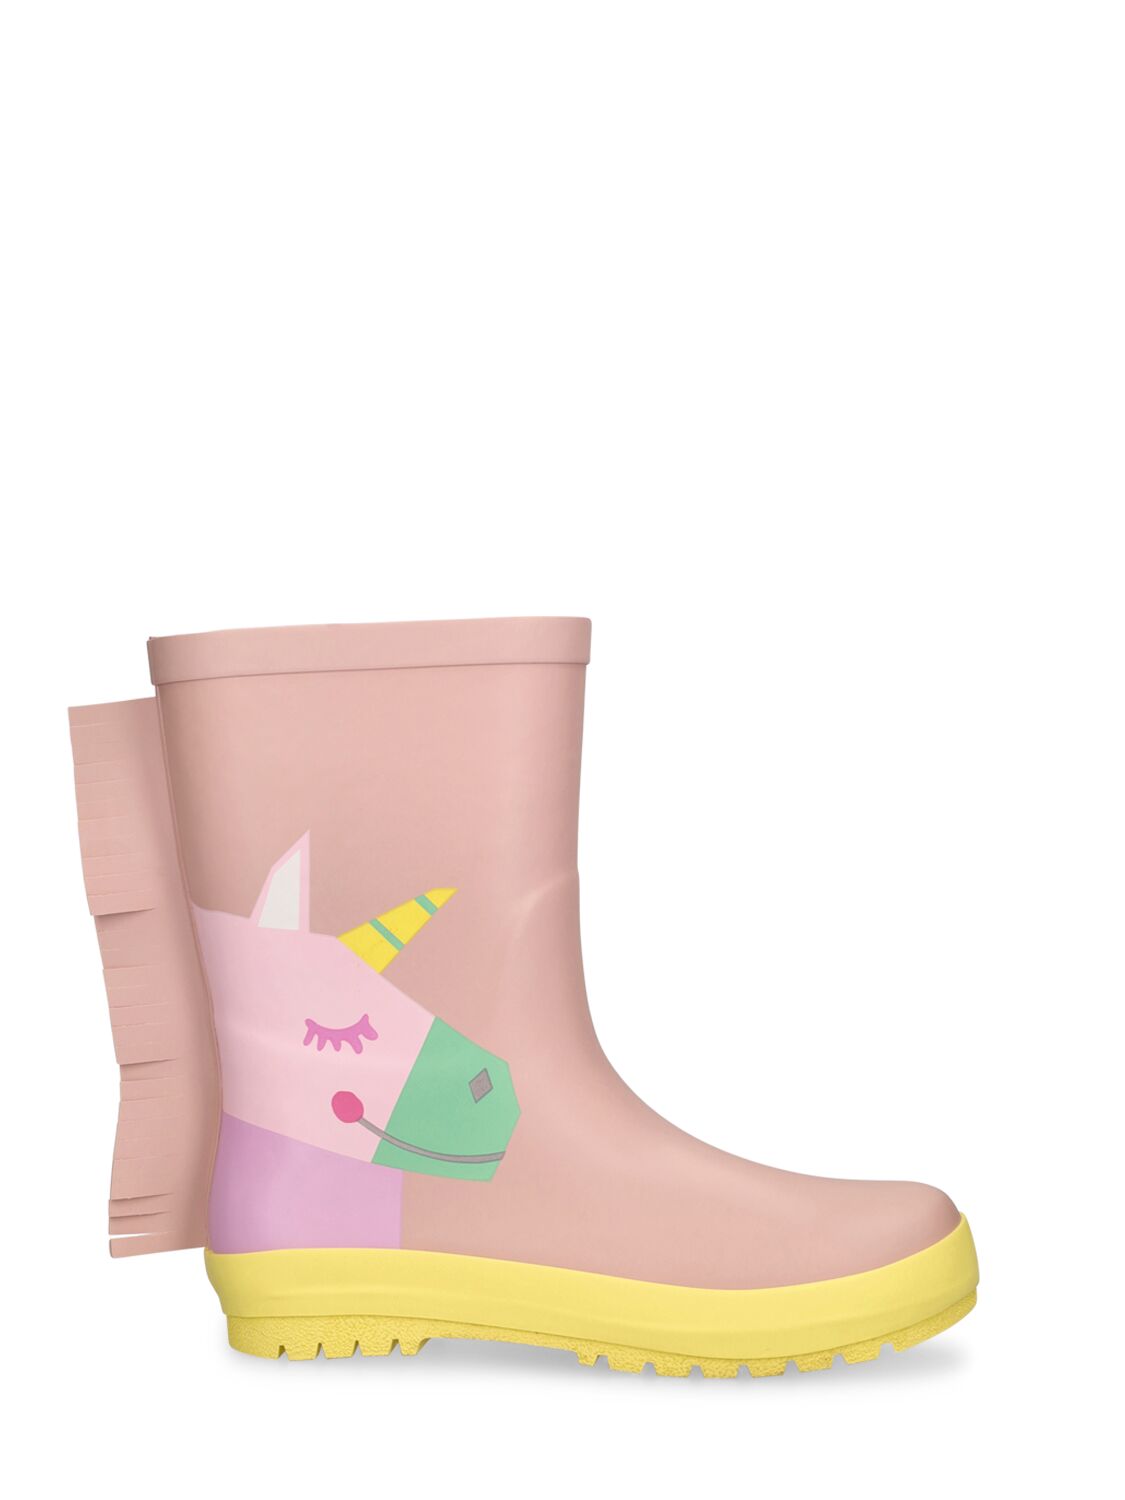 Image of Rubber Rain Boots